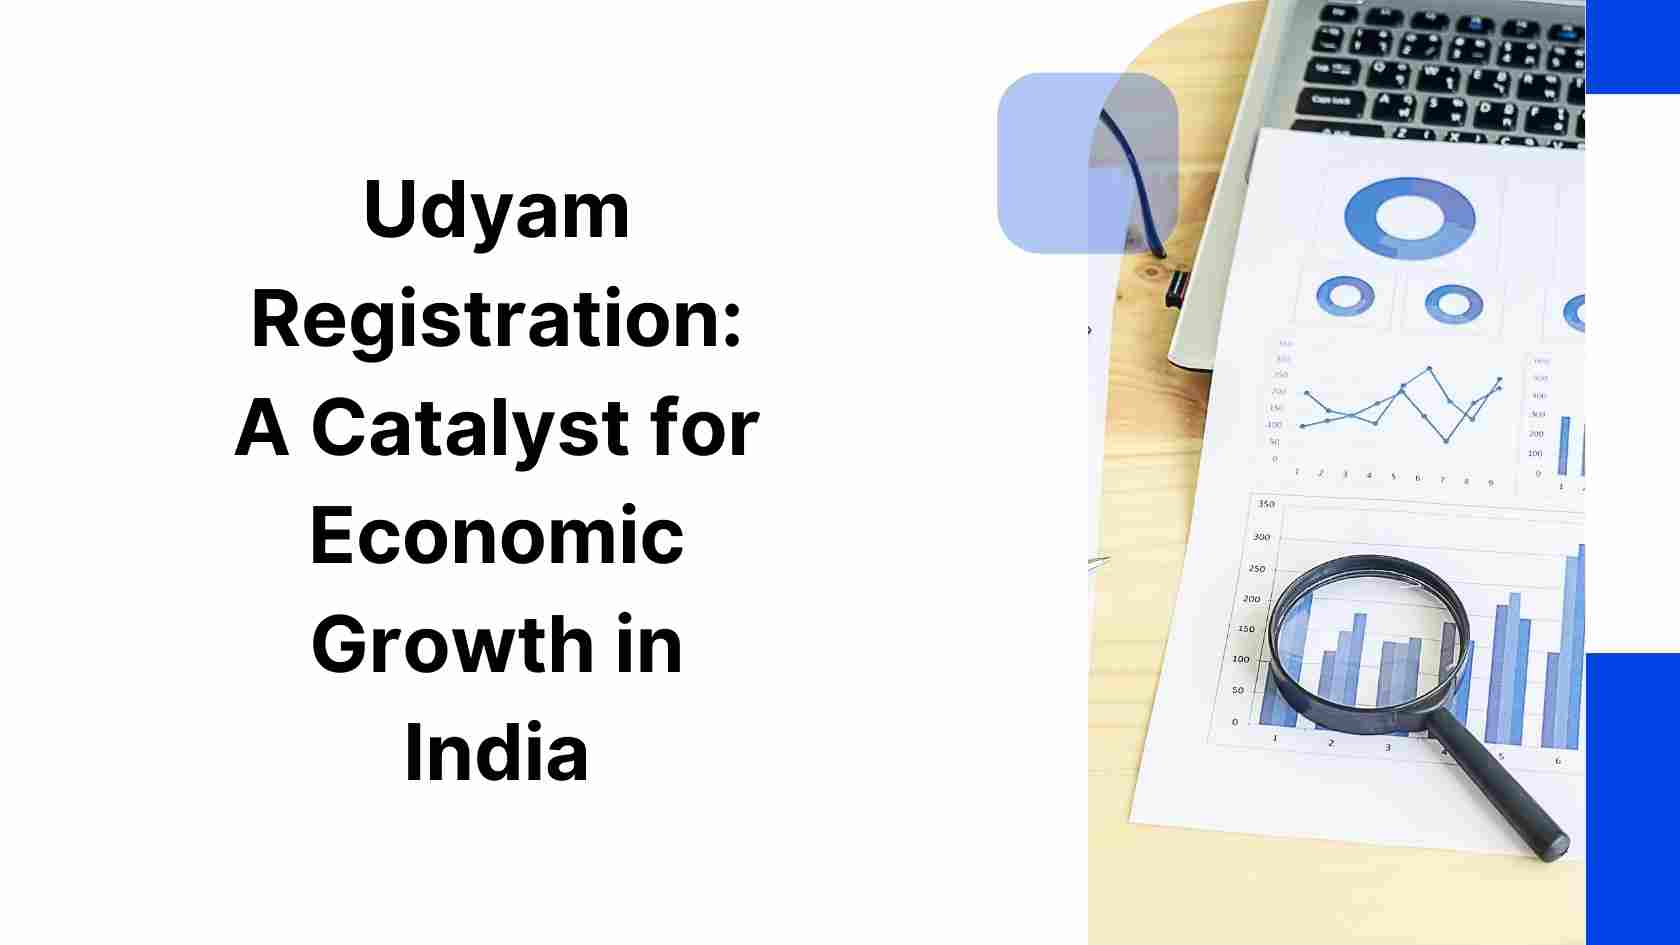 Udyam Registration: A Catalyst for Economic Growth in India